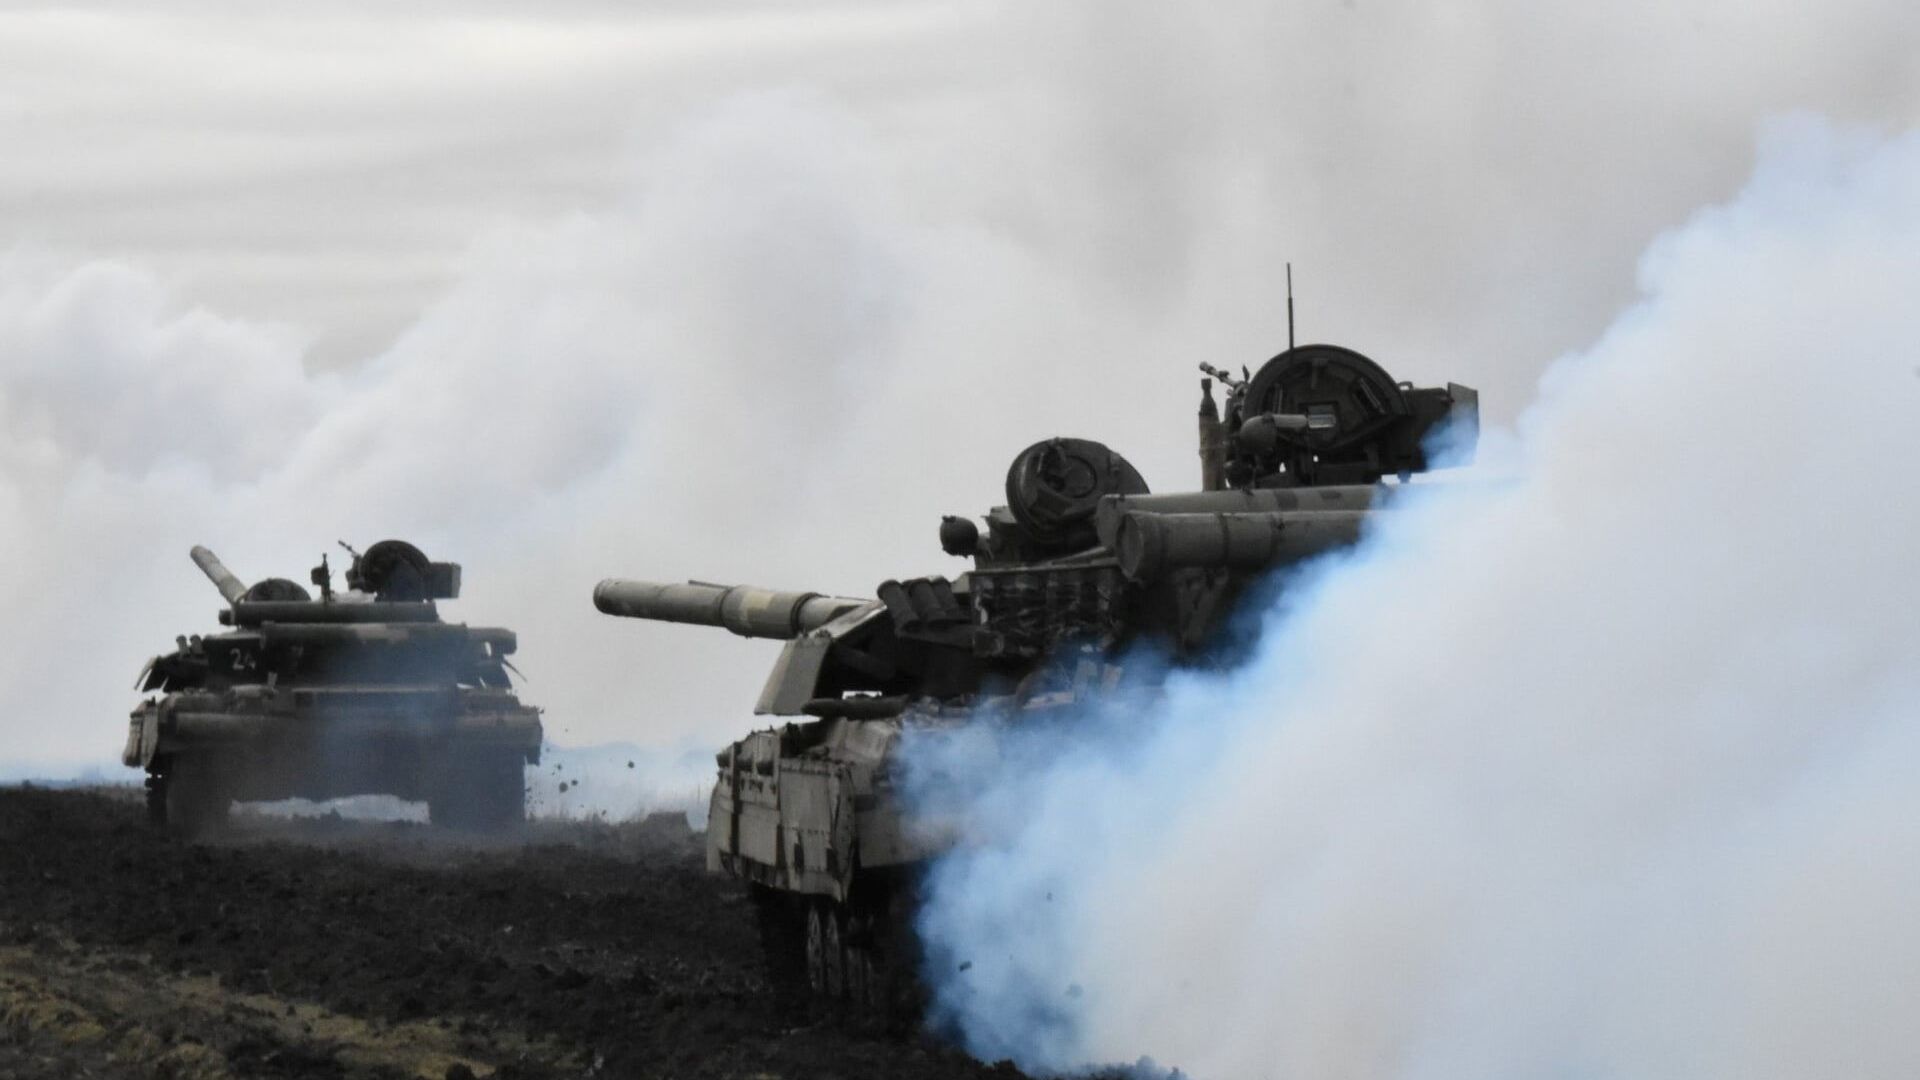 Tanks of the Ukrainian Armed Forces are seen during drills at an unknown location near the border of Crimea, Russia, in this handout picture released by the General Staff of the Armed Forces of Ukraine press service on 14 April 2021. - Sputnik International, 1920, 02.02.2022